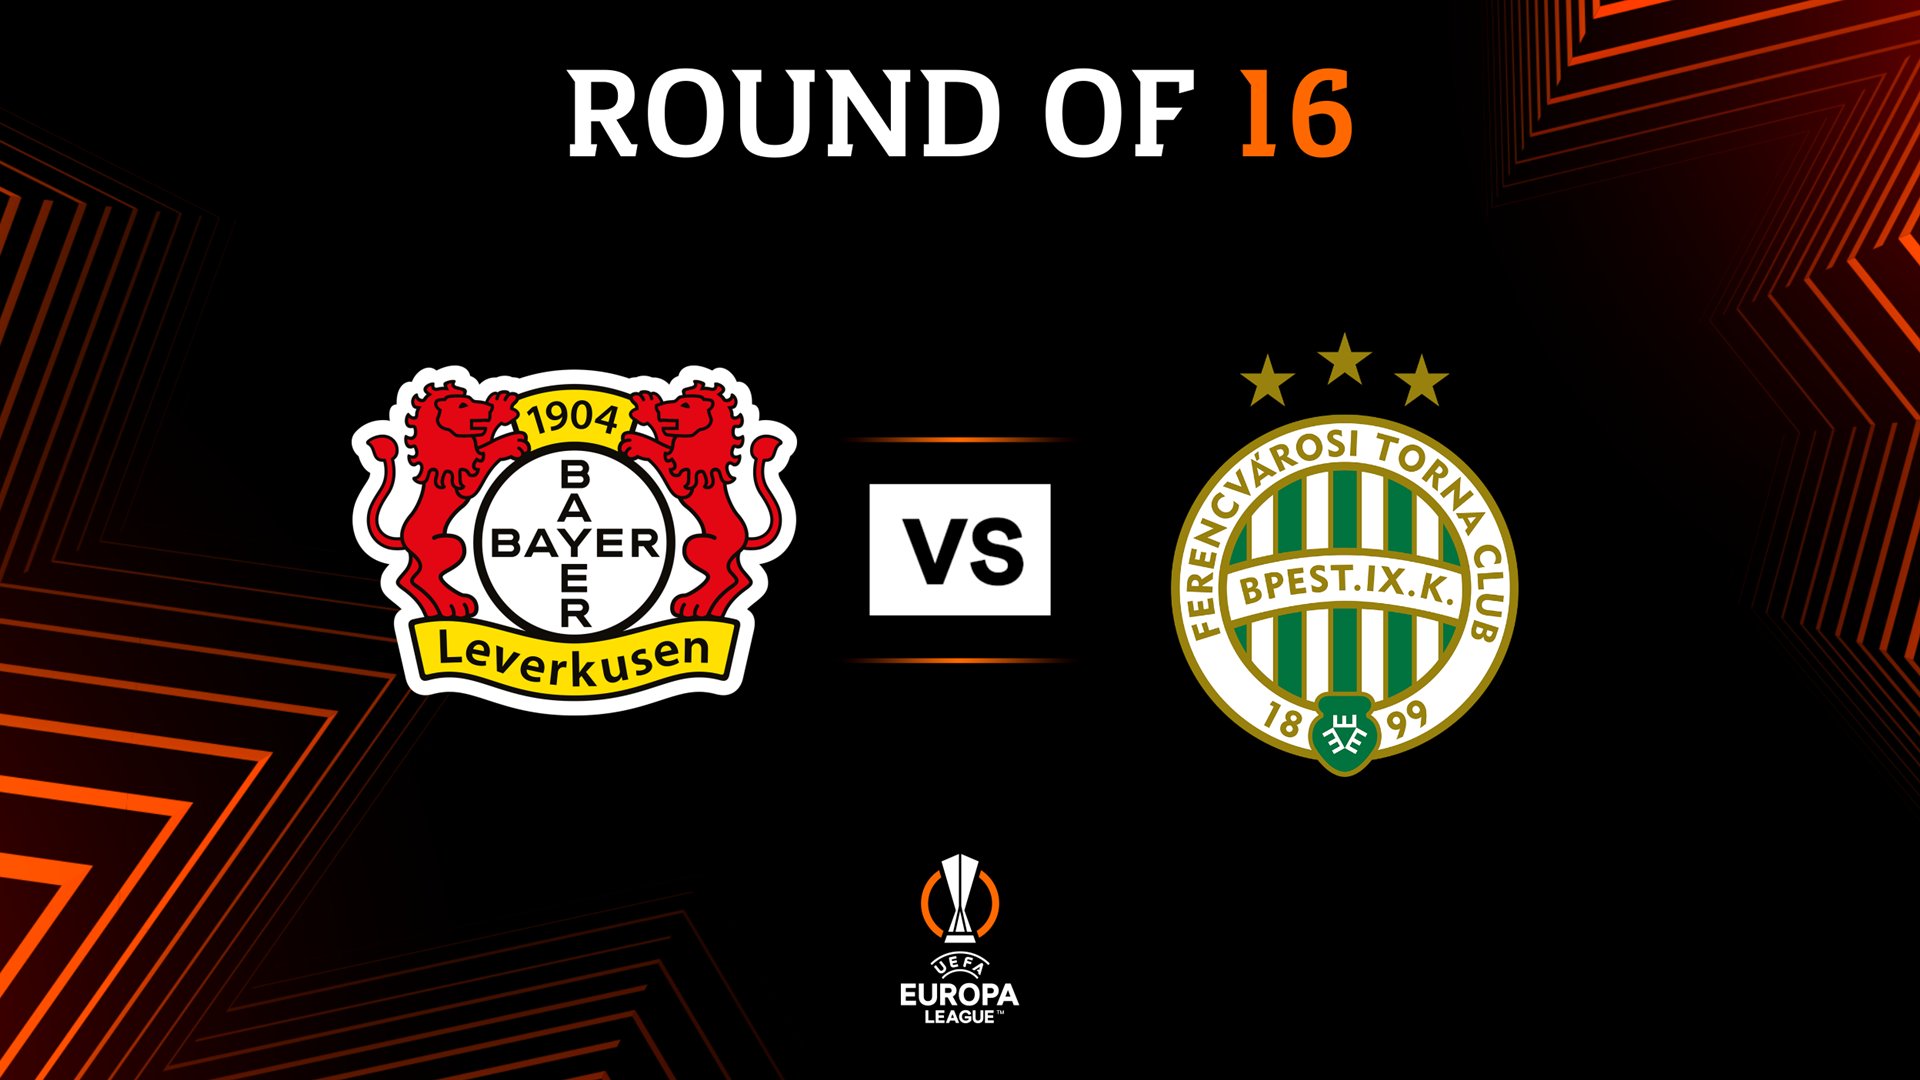 Bayer 04 Leverkusen on X: The #Werkself will face Ferencváros Budapest in  the round of 16 of the Europa League. #Bayer04, #UEL